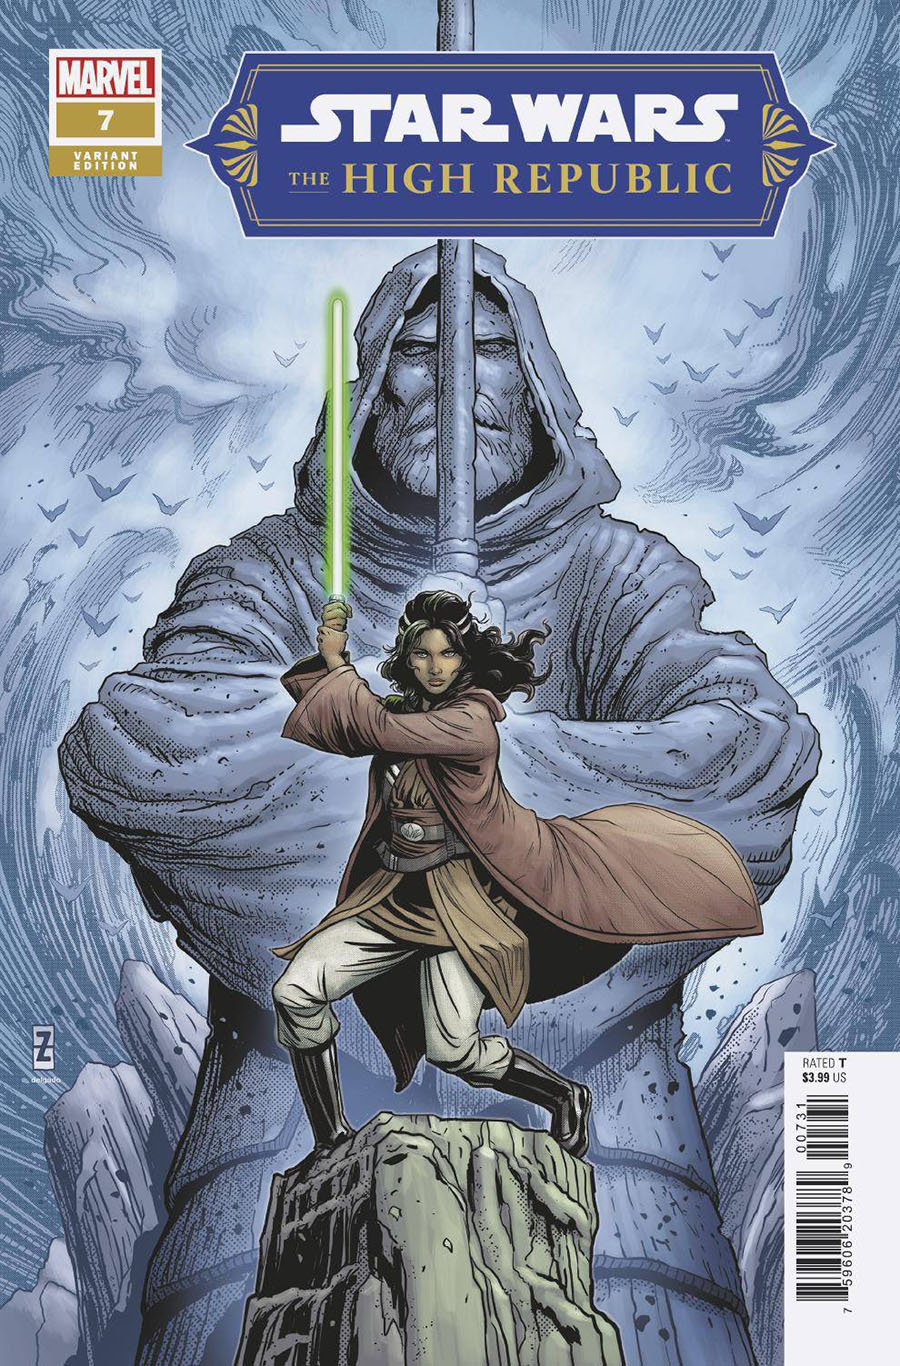 Star Wars The High Republic Vol 2 #7 Cover C Incentive Patrick Zircher Variant Cover